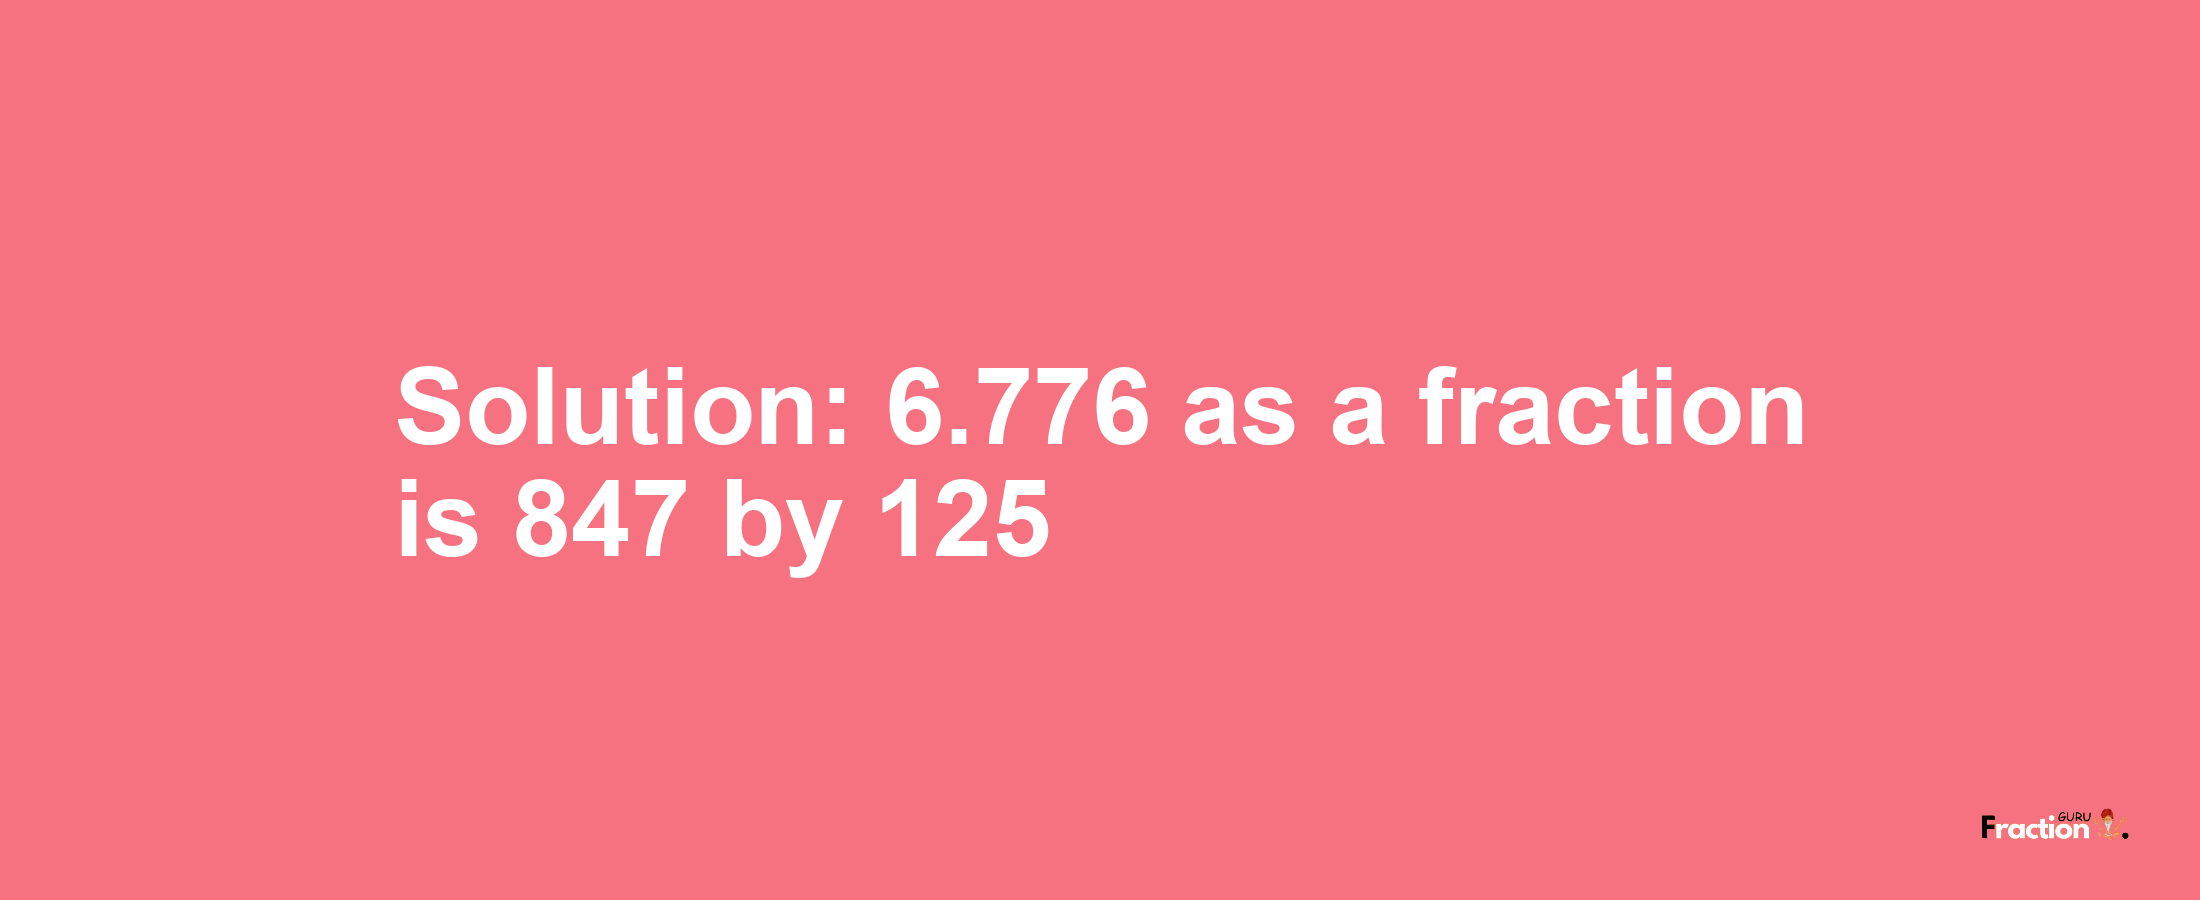 Solution:6.776 as a fraction is 847/125